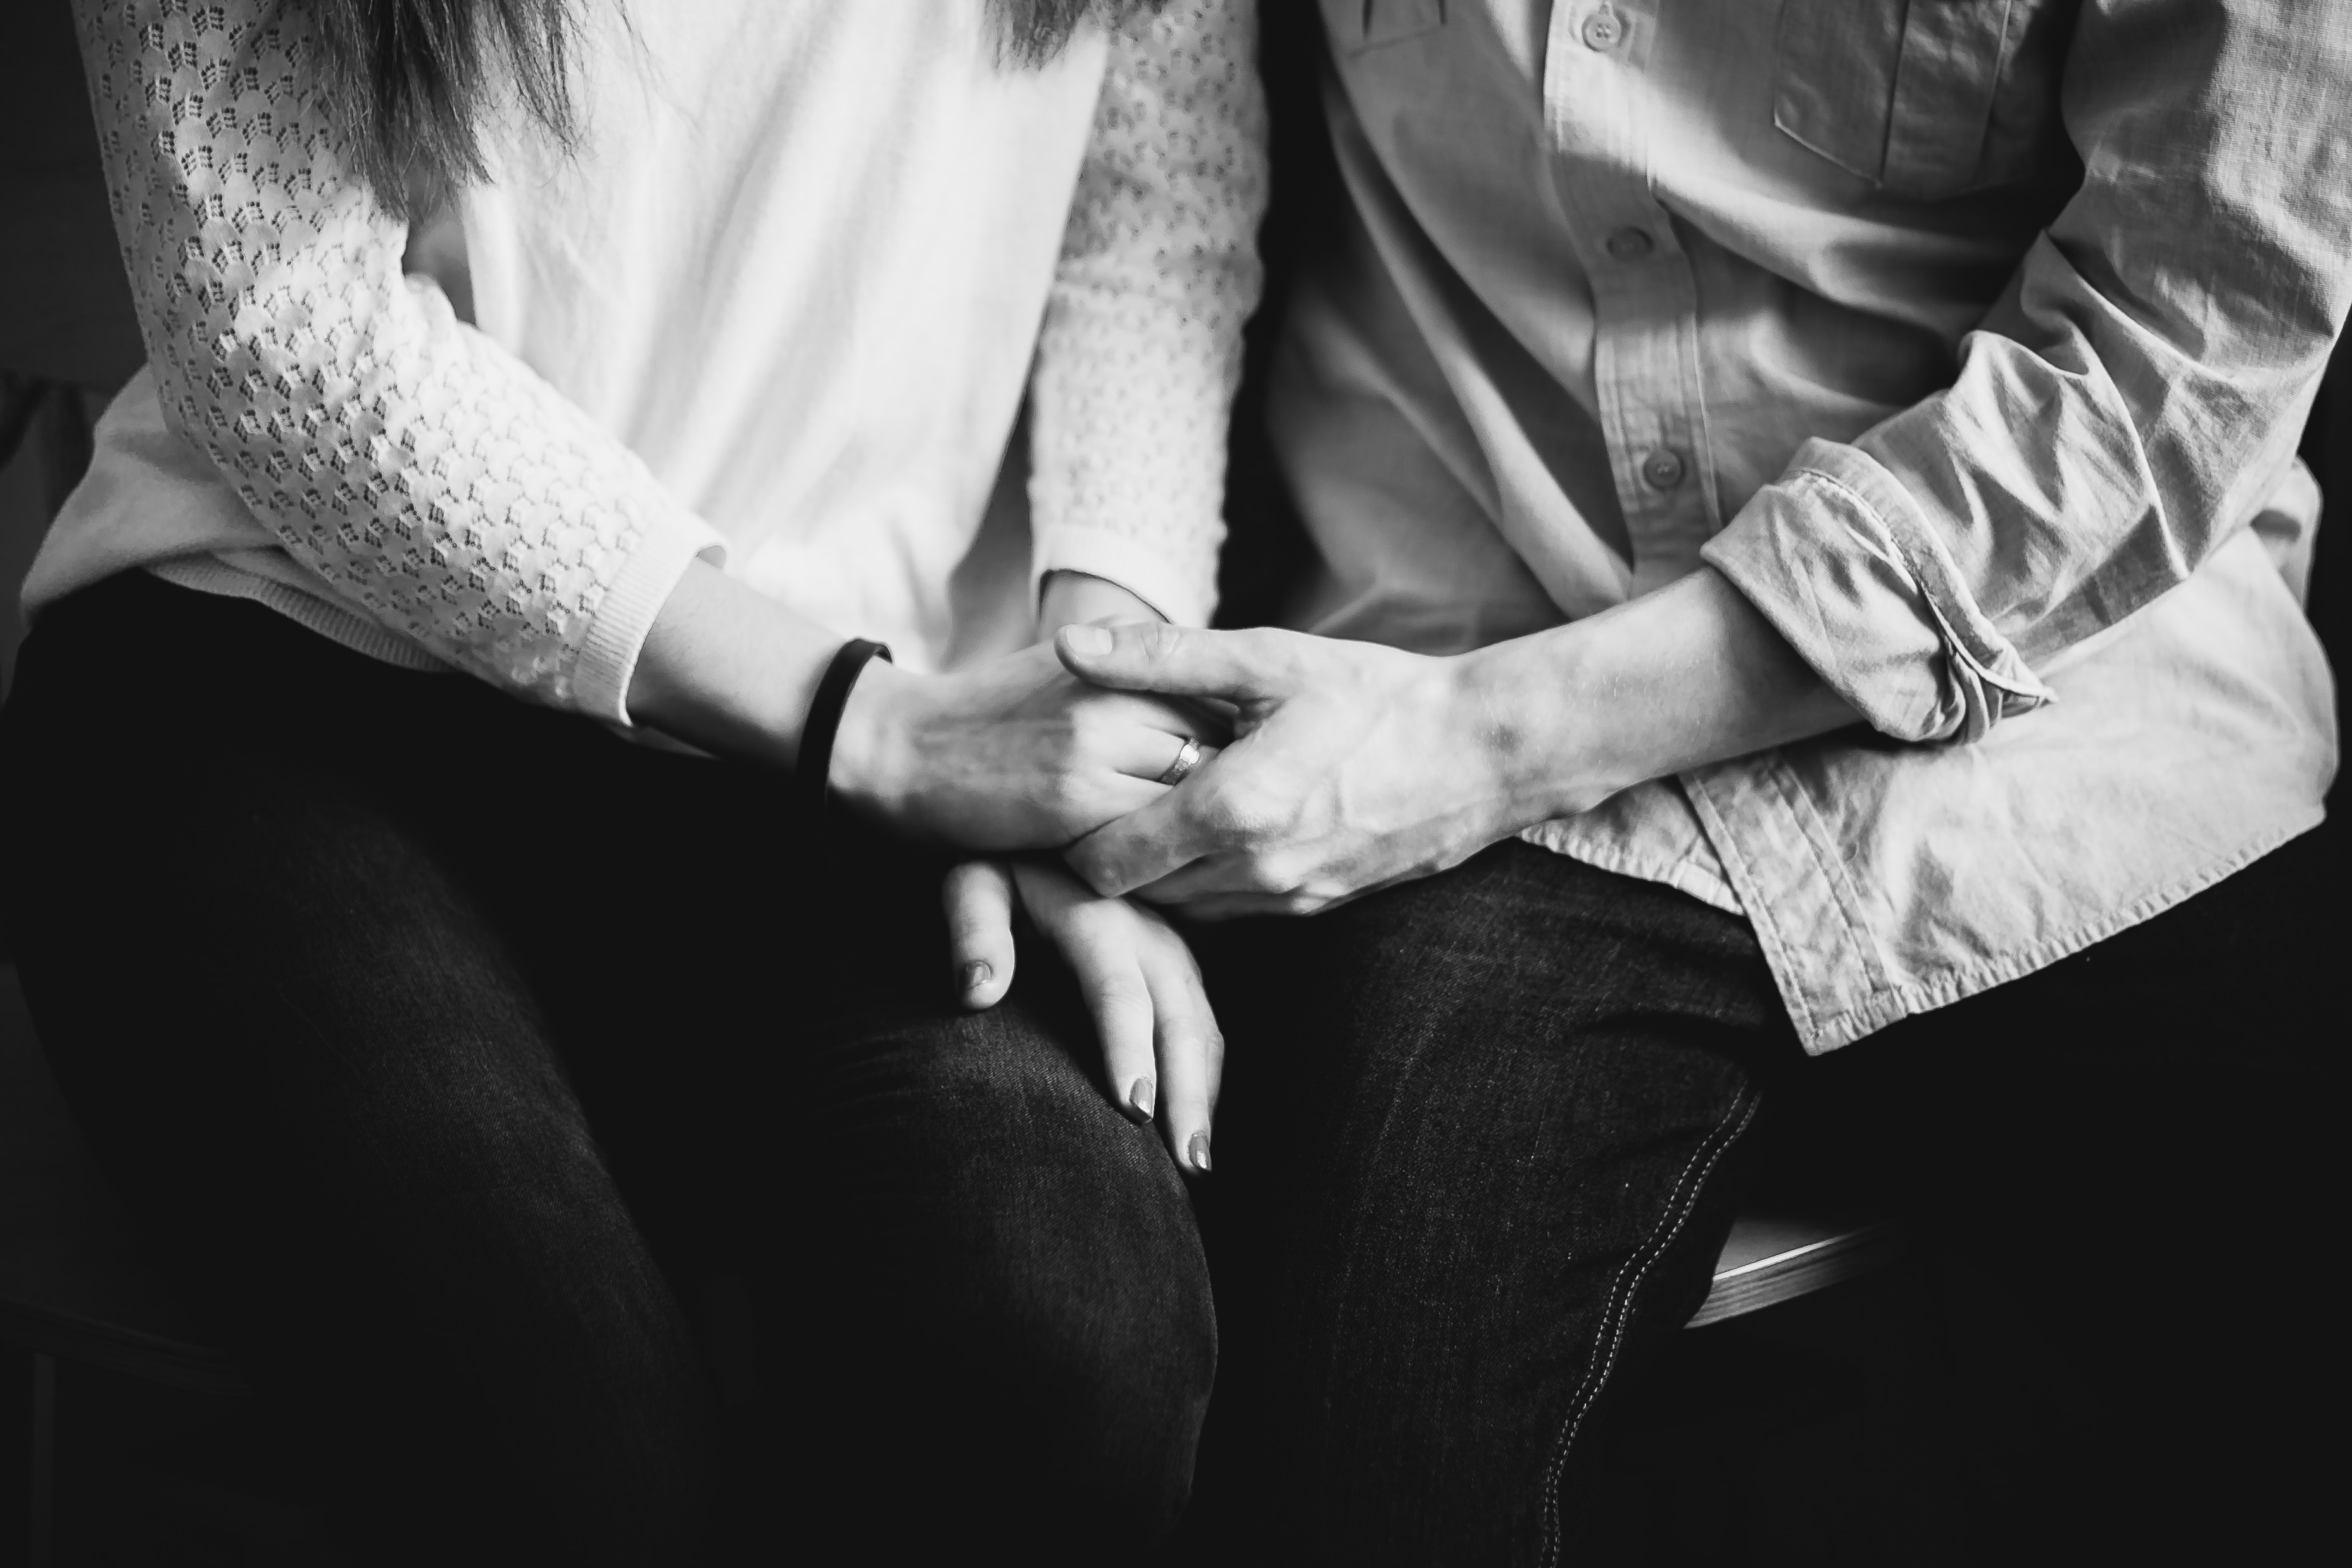 pair, love, couple, hands, bw, chb, tenderness